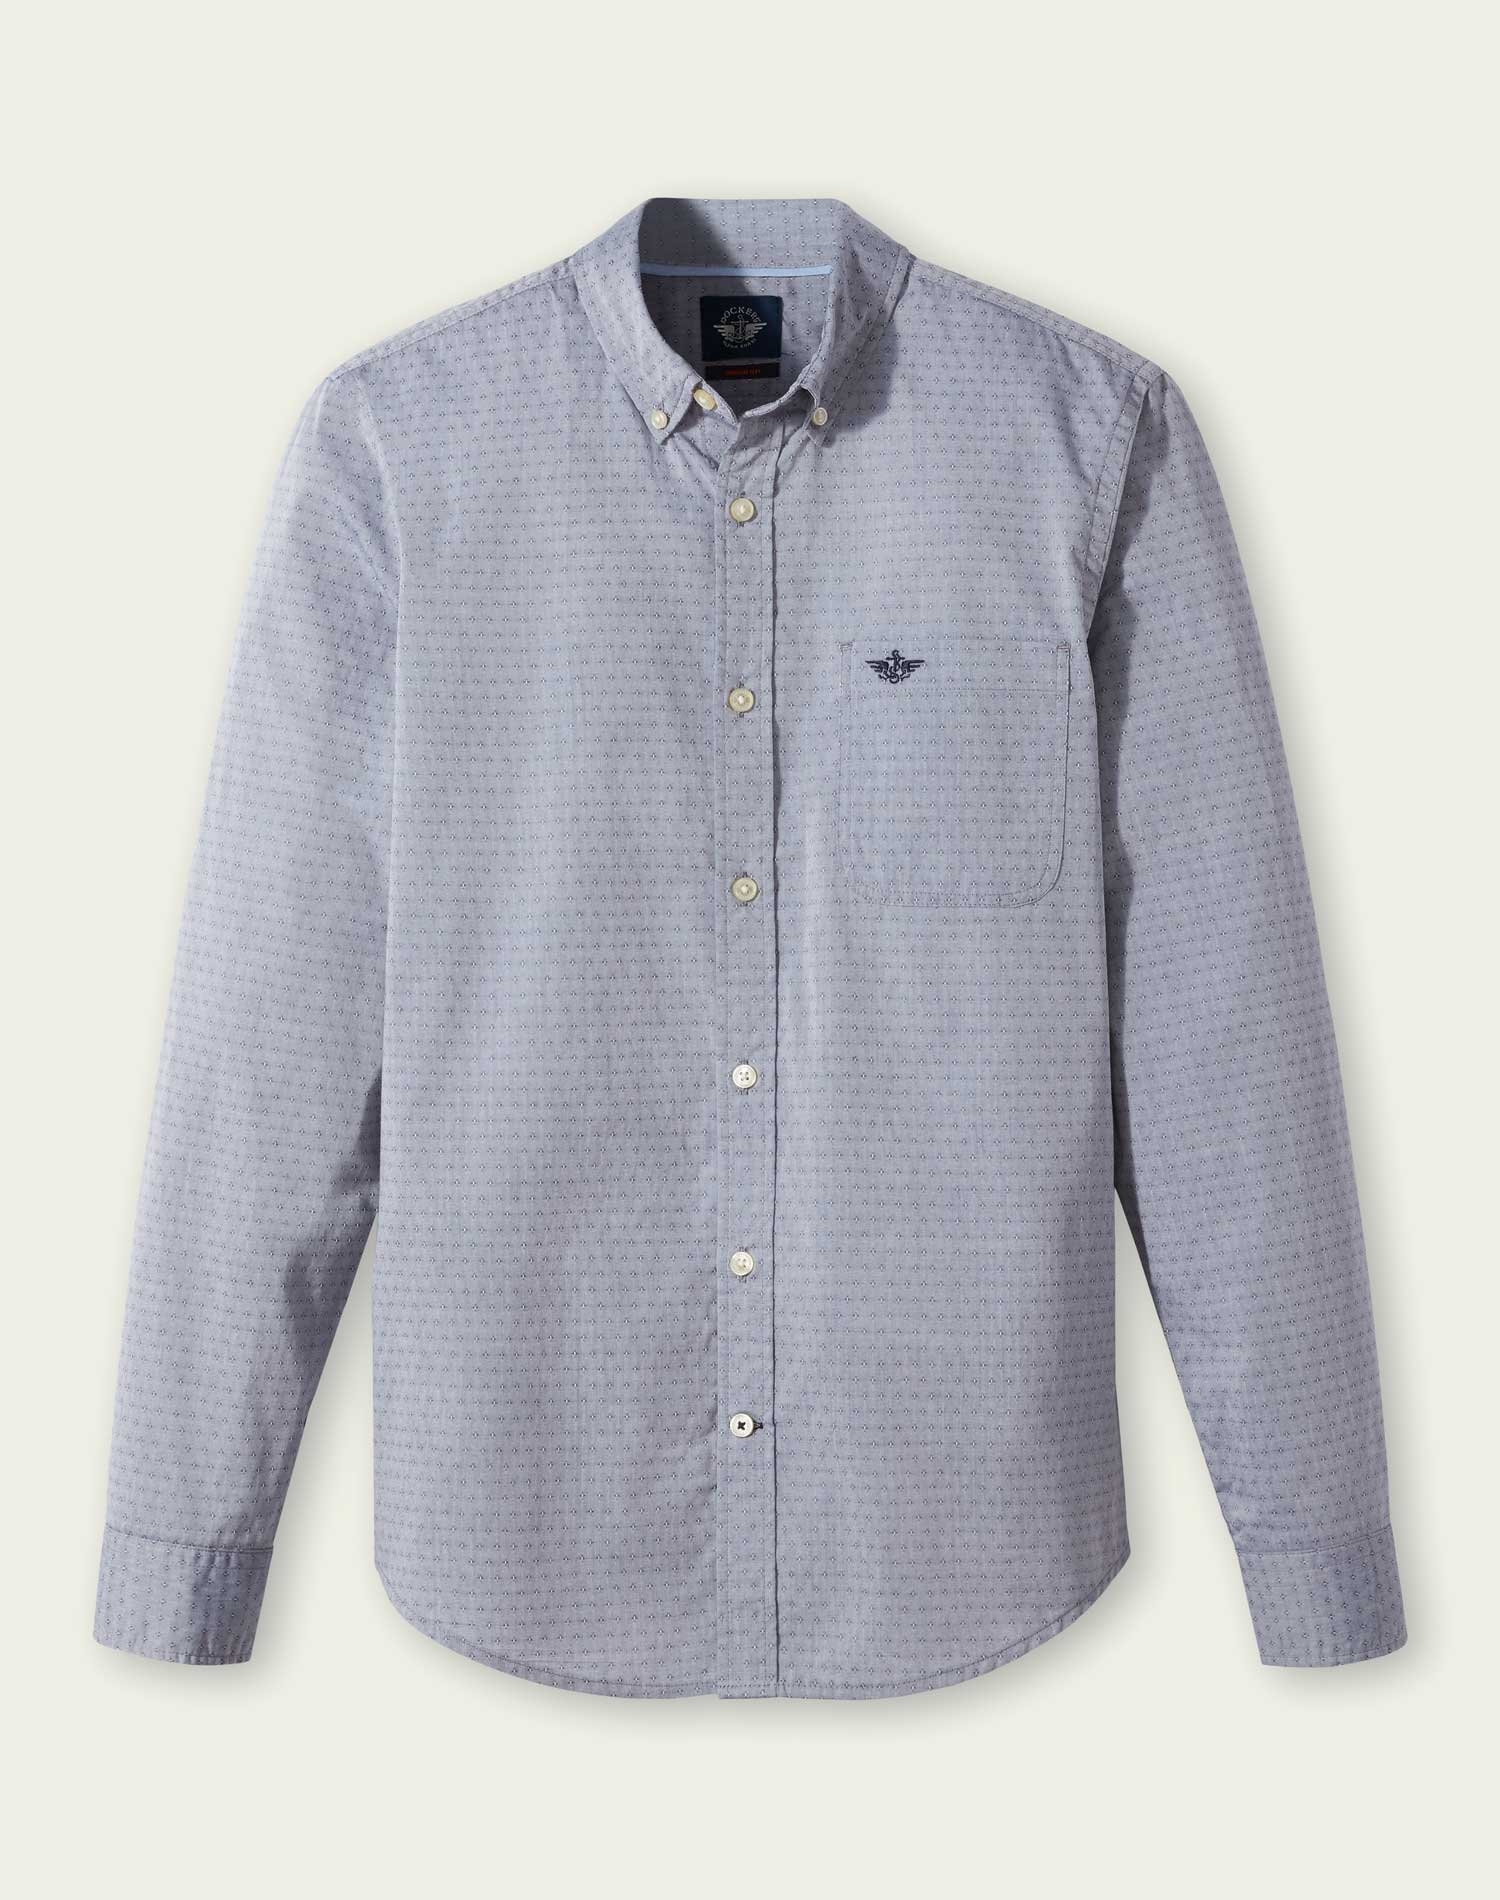 Dockers camisa d'home m/ll 69684-0128 gris